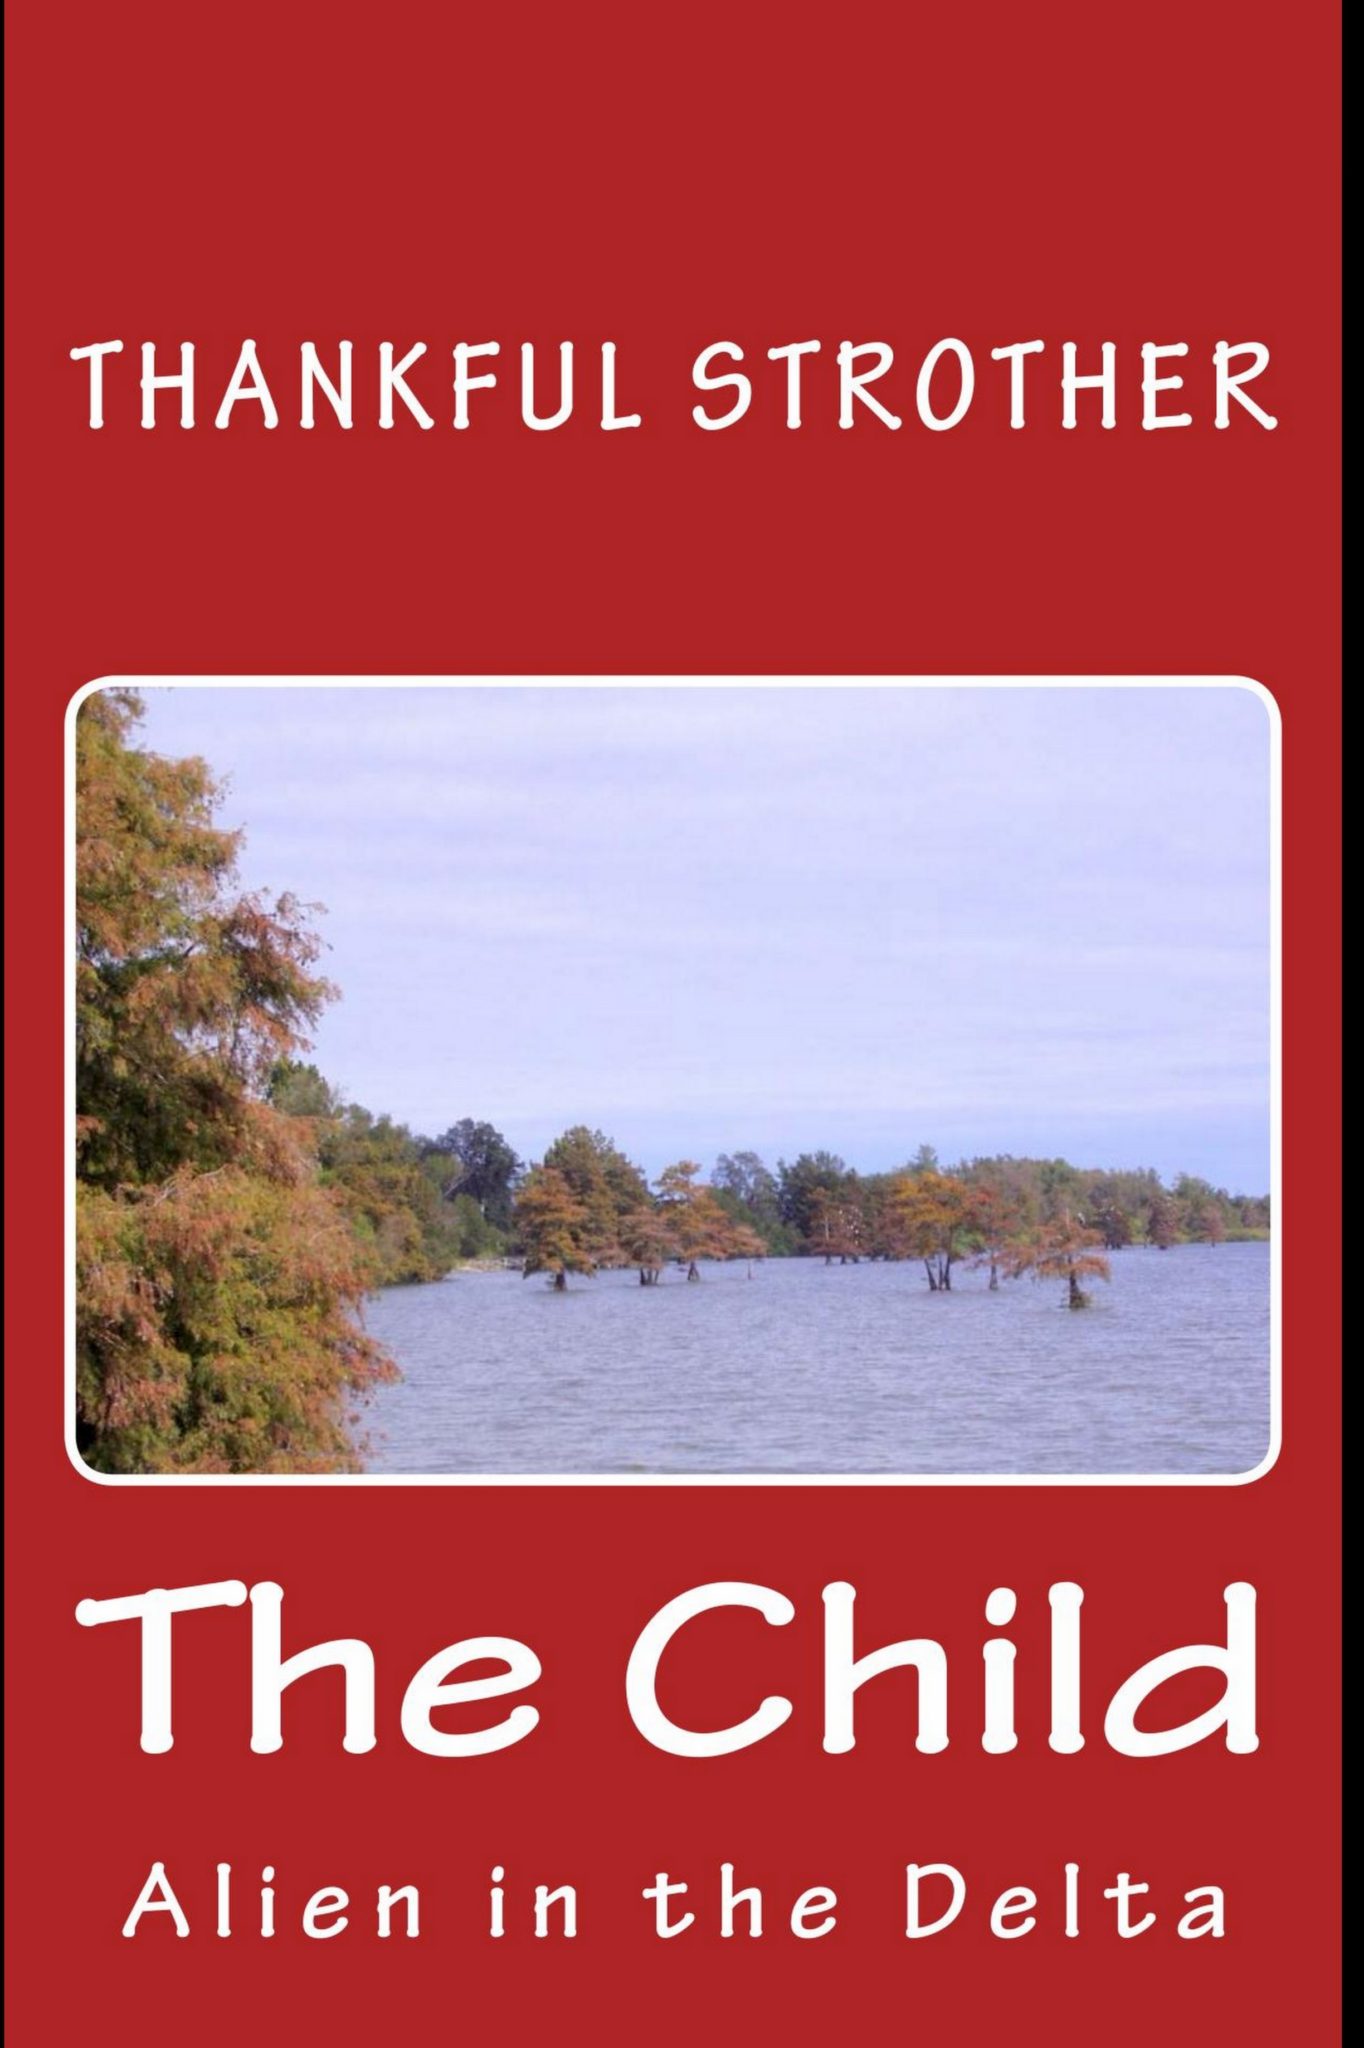 FREE: The Child – Alien in the Delta by Thankful Strother